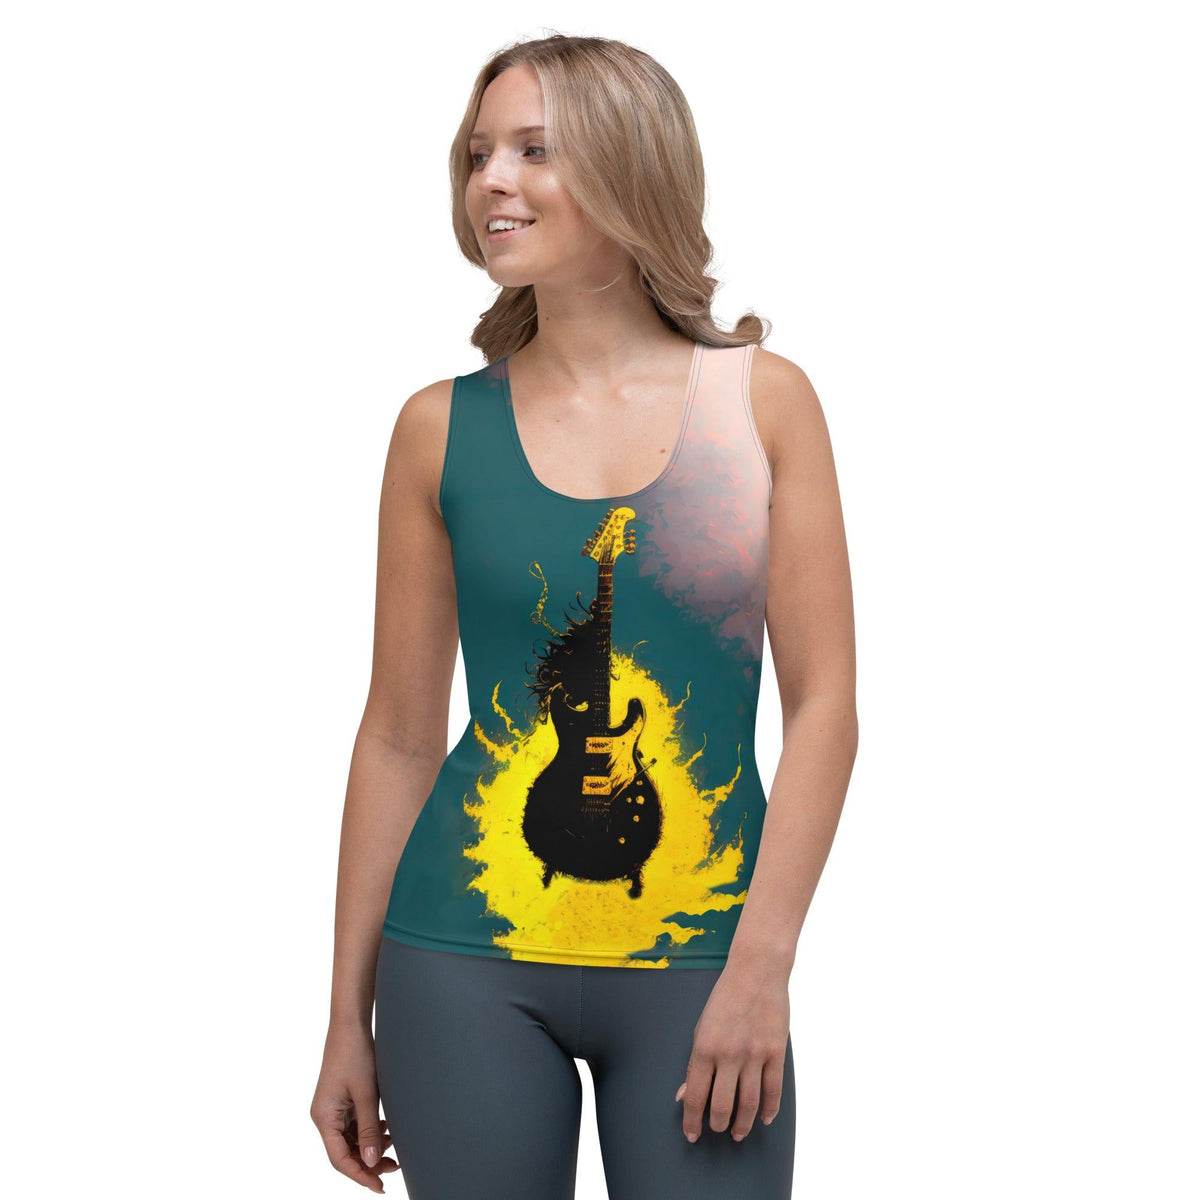 Melody-inspired Women's Tank Top - Music Lovers Edition - Beyond T-shirts